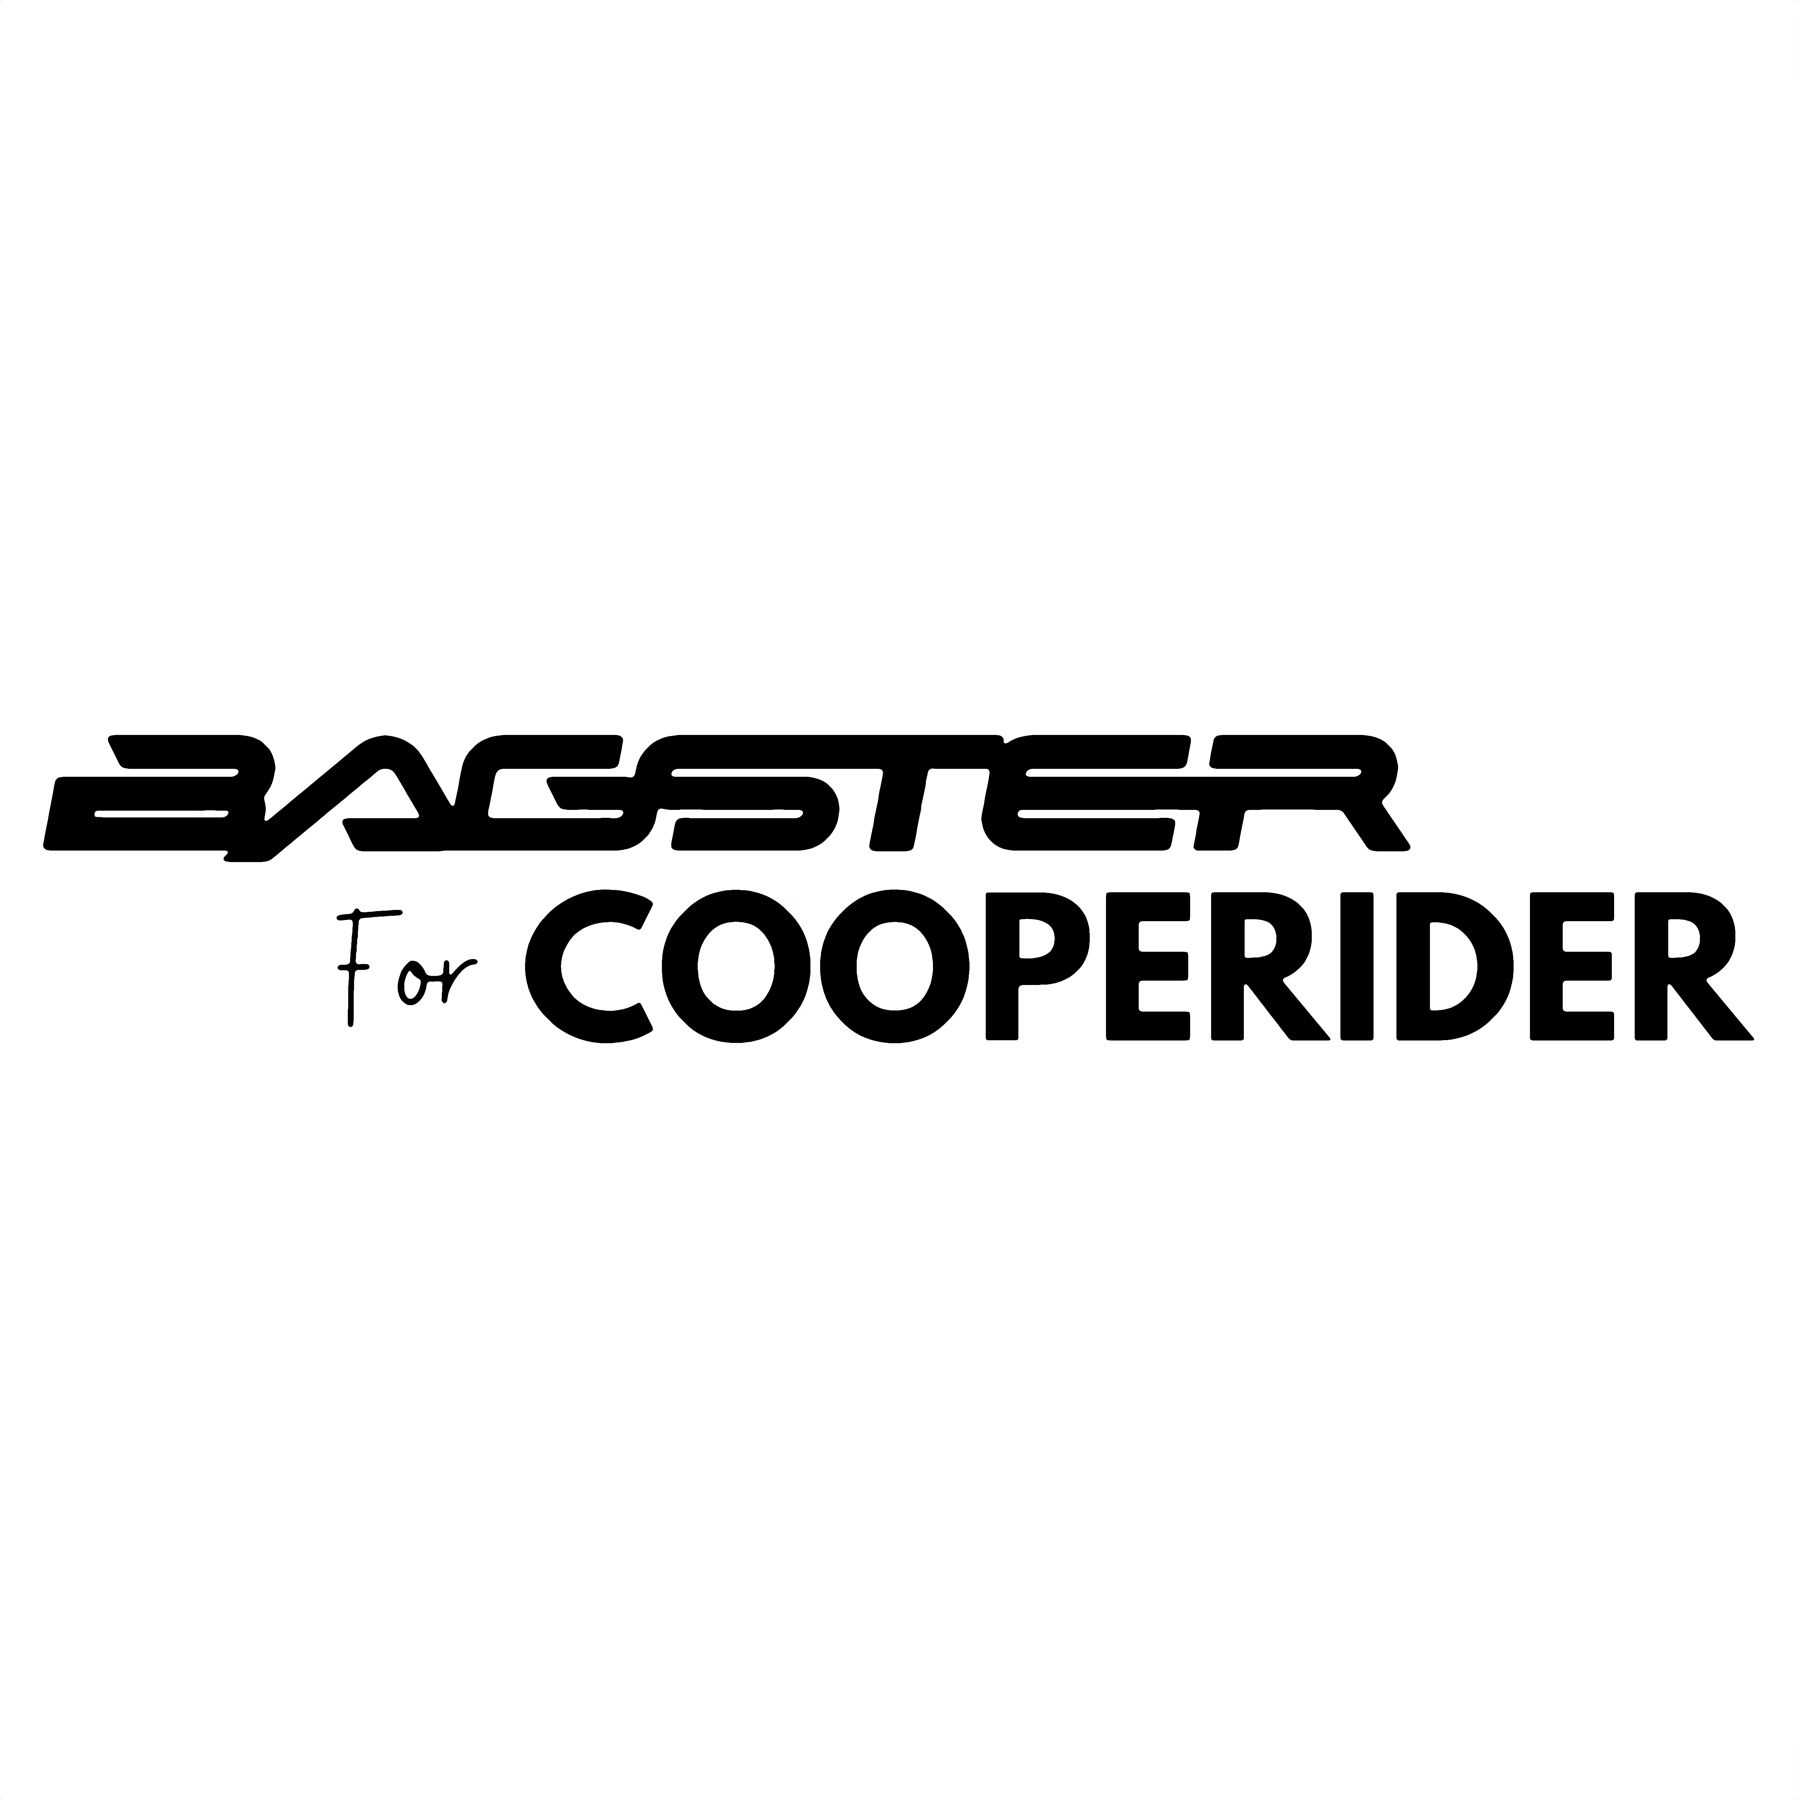 Bagster for Cooperider